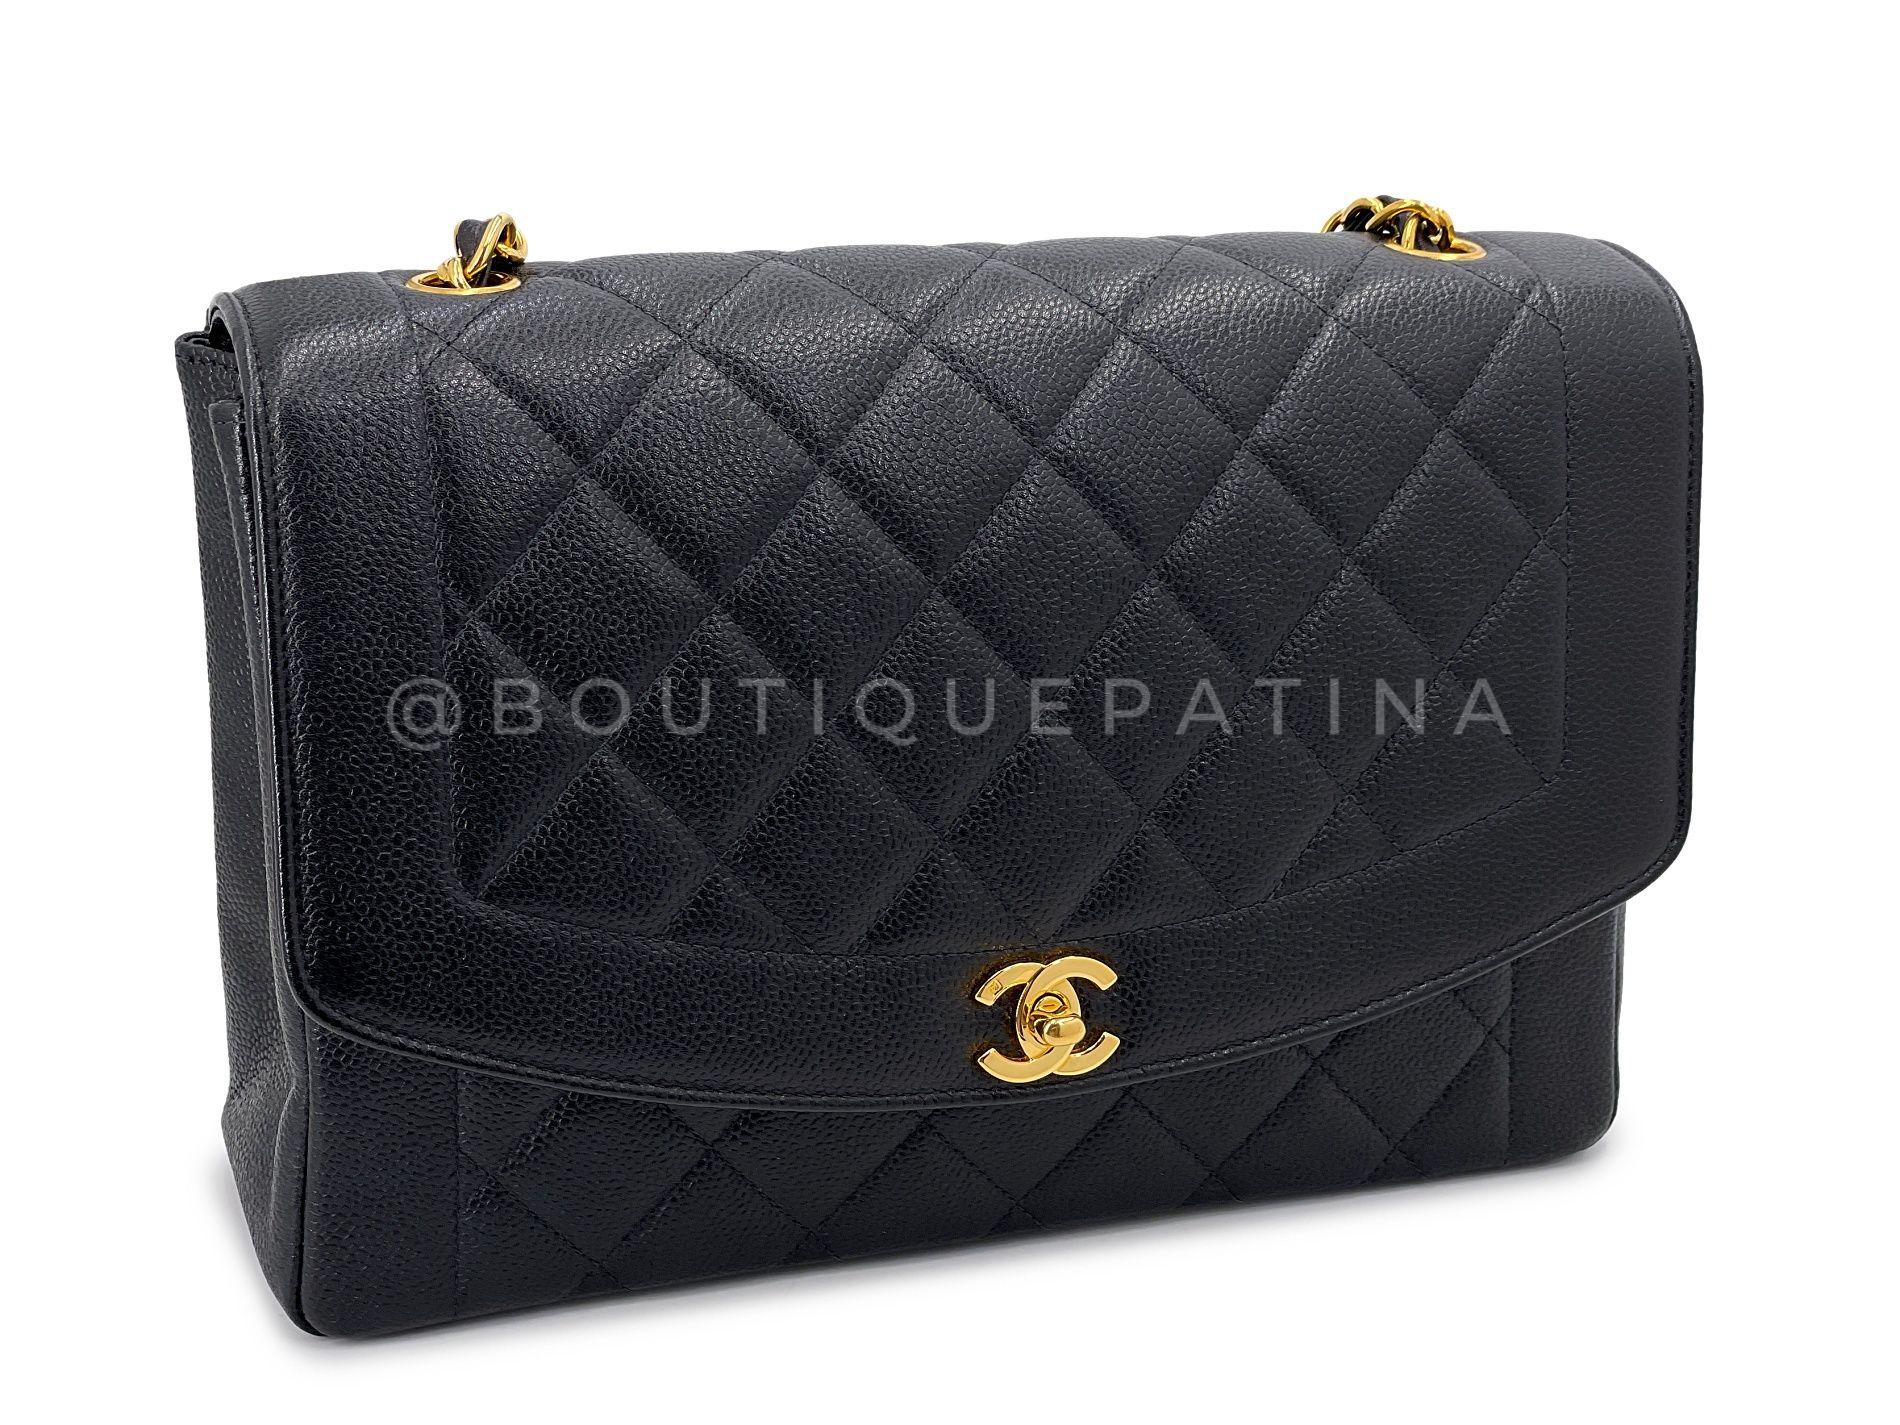 Rare Chanel 1997 Vintage Large Jumbo Black Caviar Diana Flap Bag 24k GHW 68110 In Excellent Condition For Sale In Costa Mesa, CA